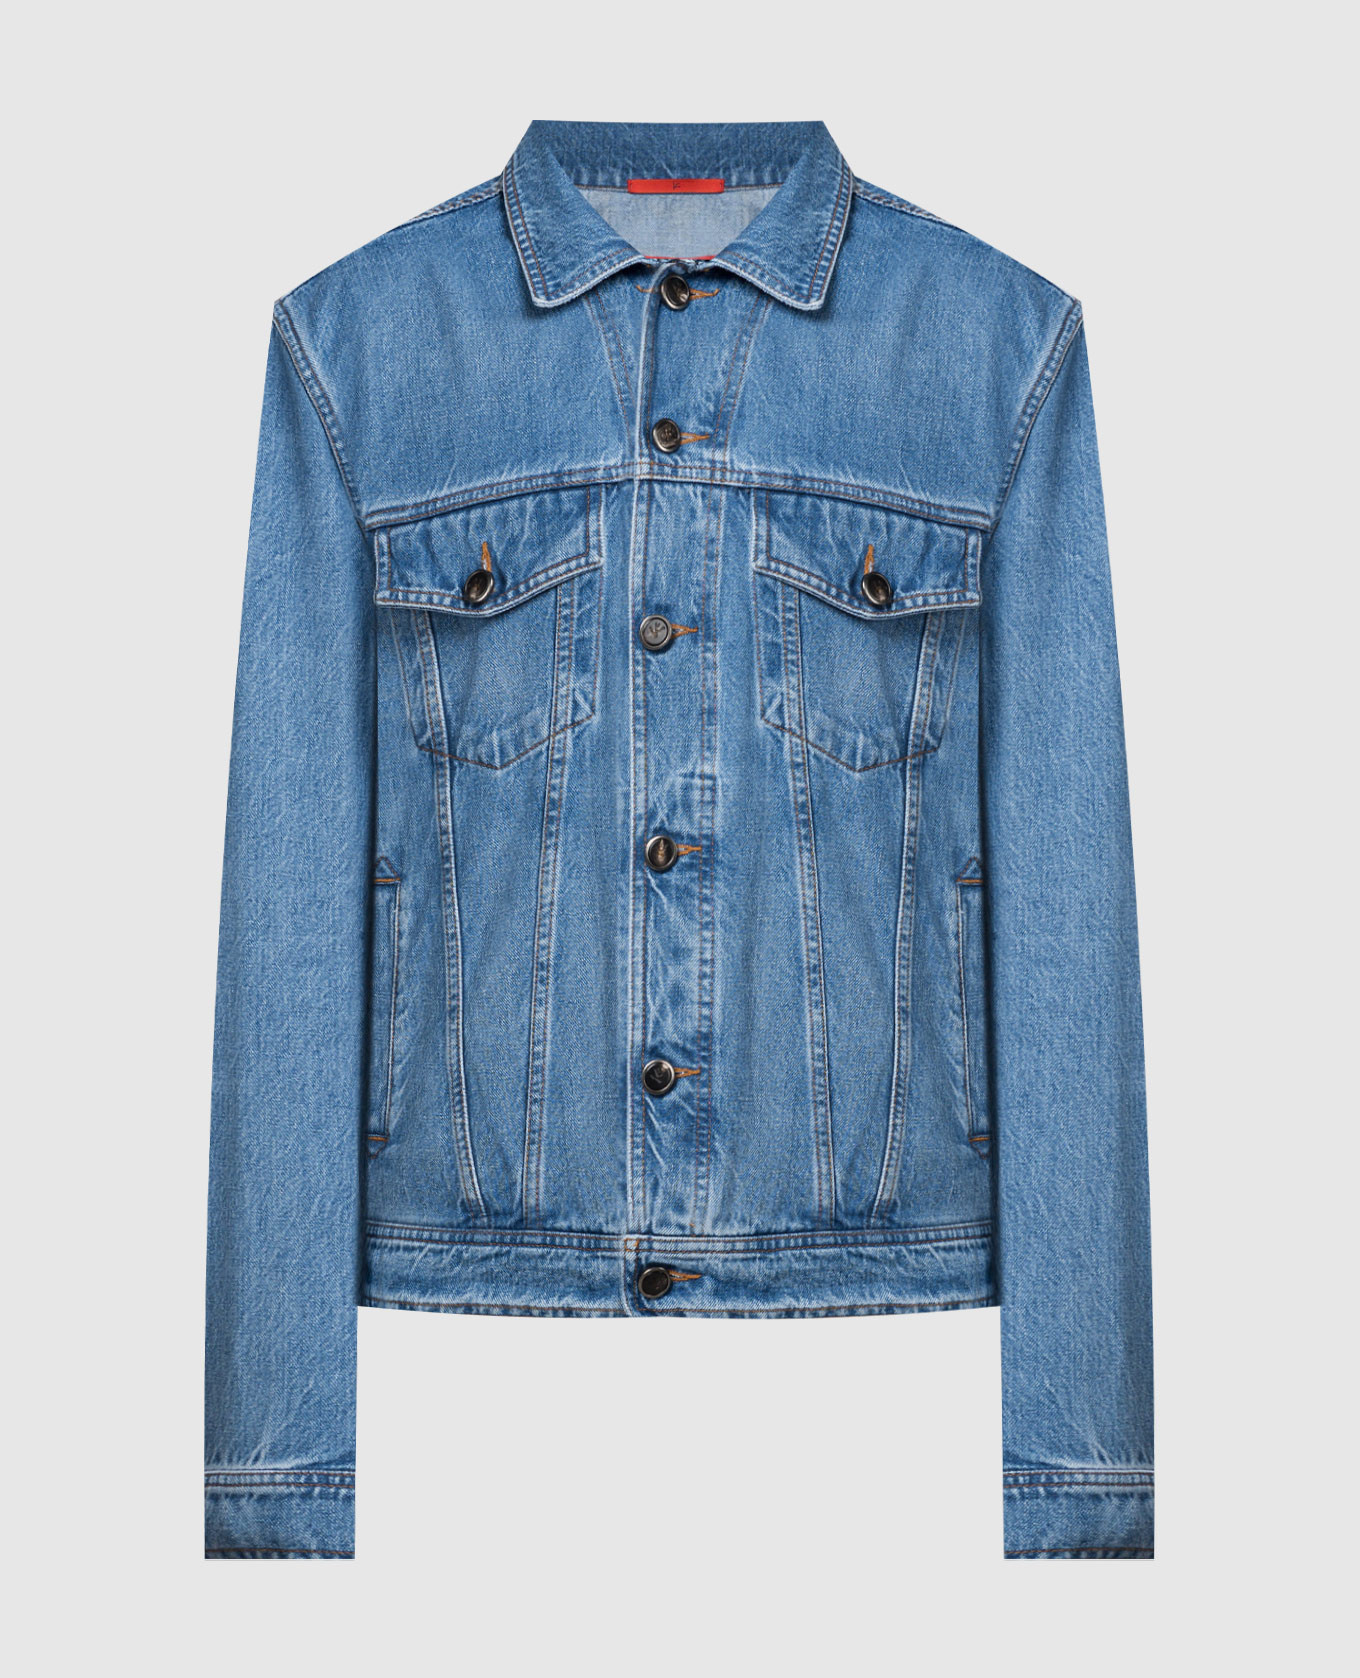 Blue denim jacket with a distressed effect